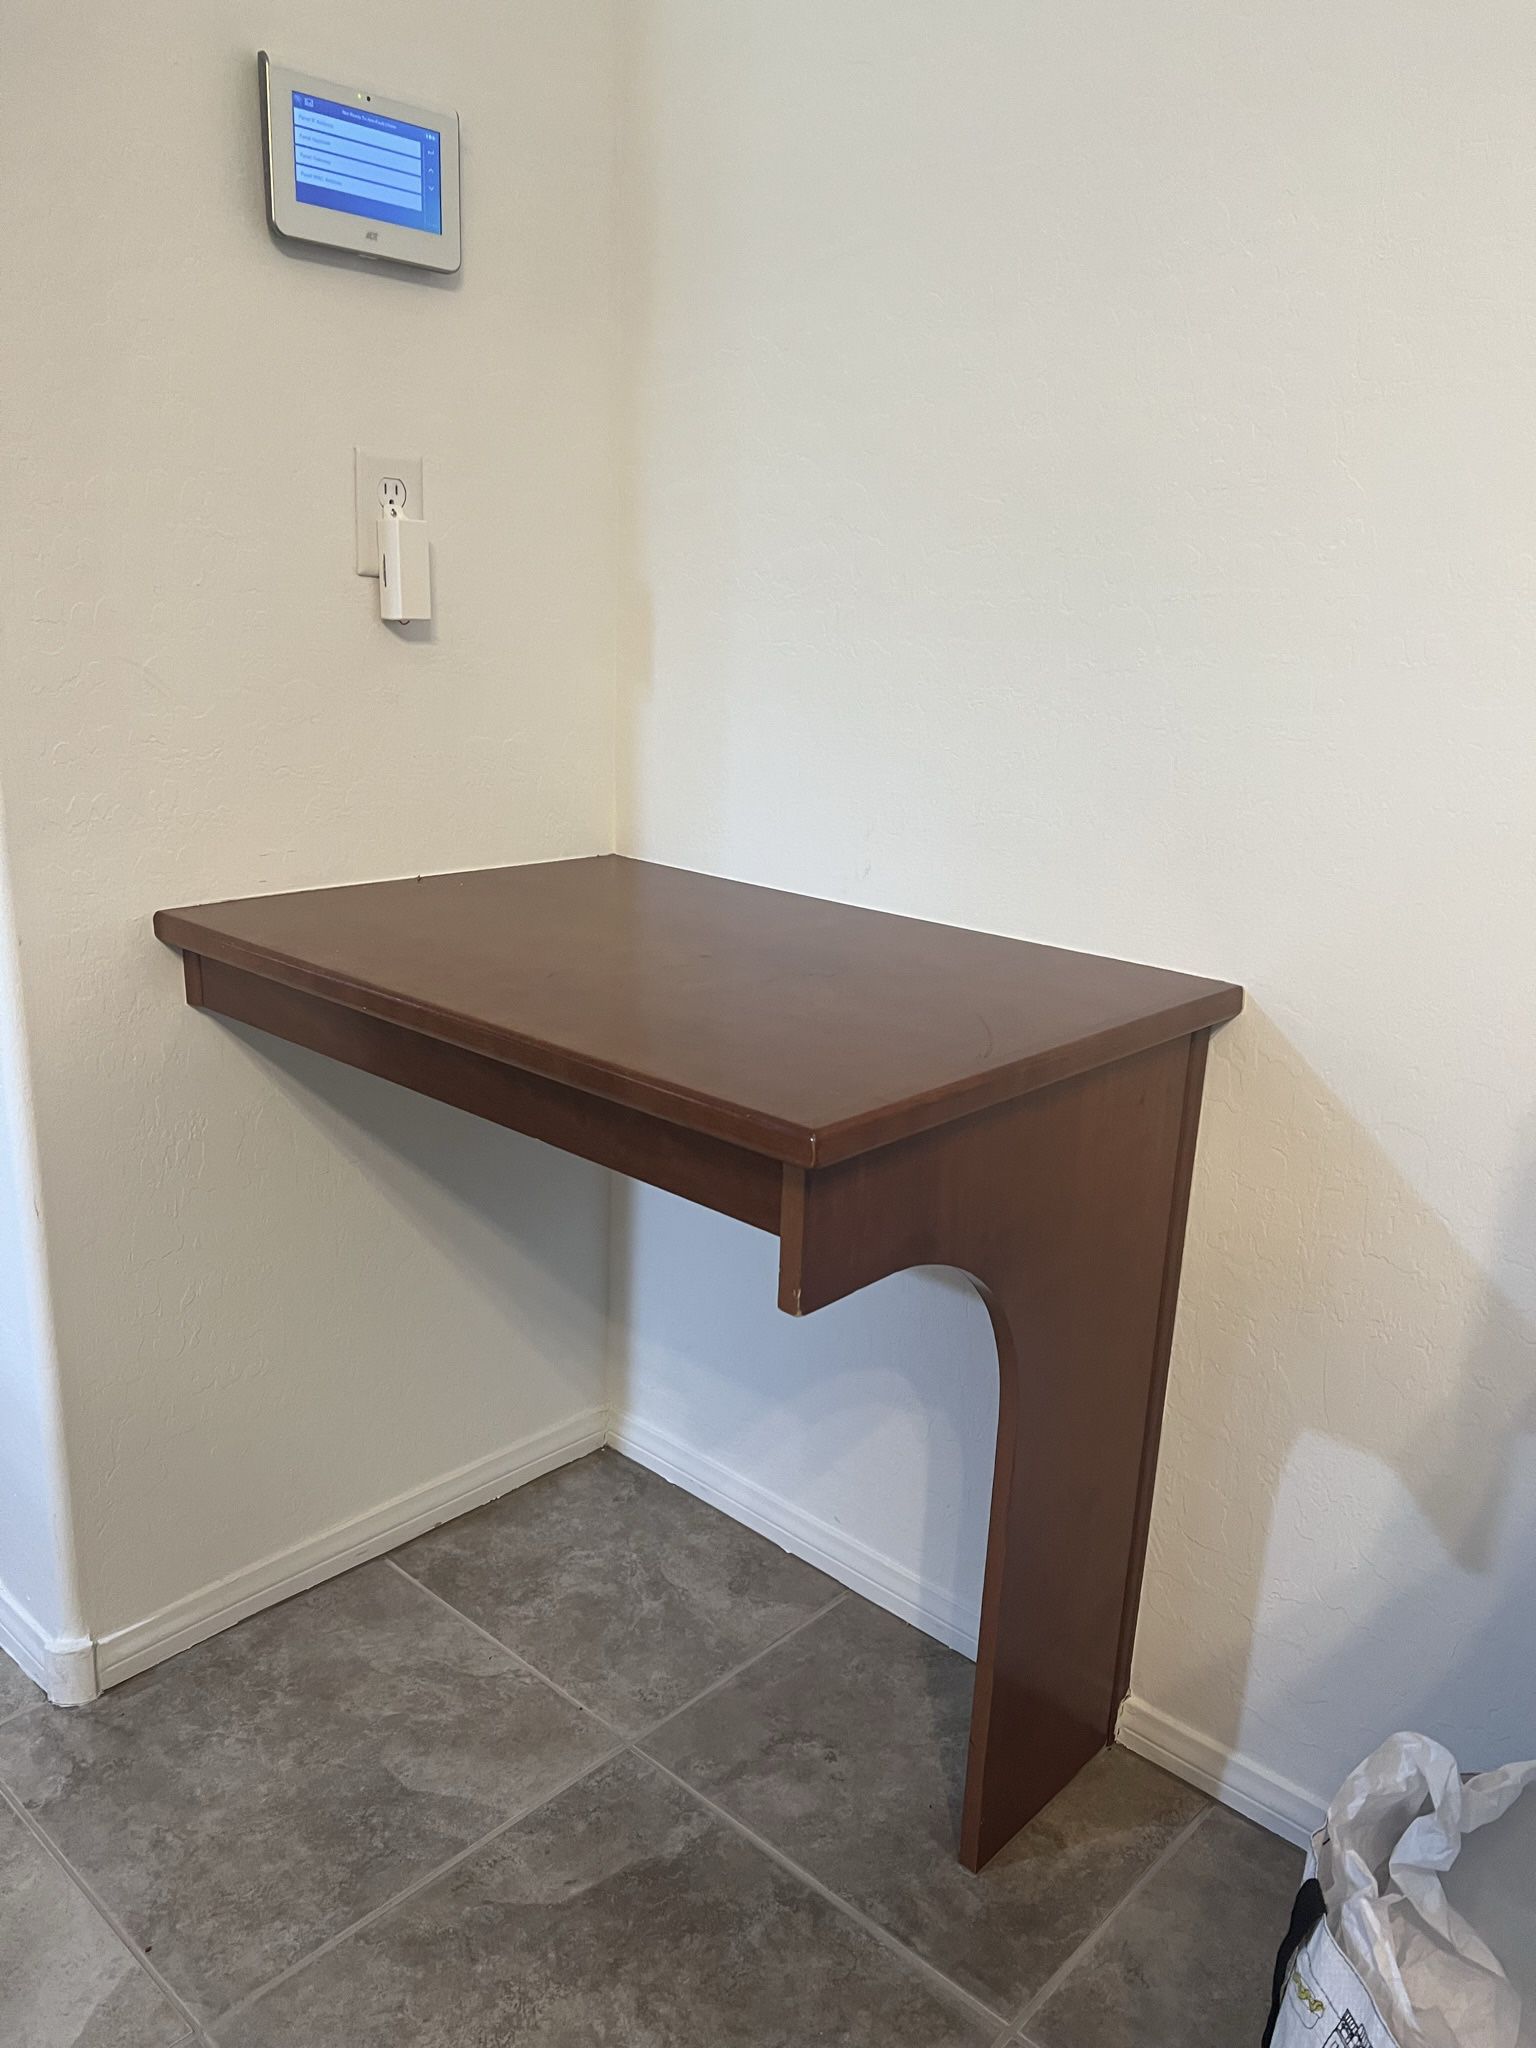 Corner Desk Attached To The Walls $10